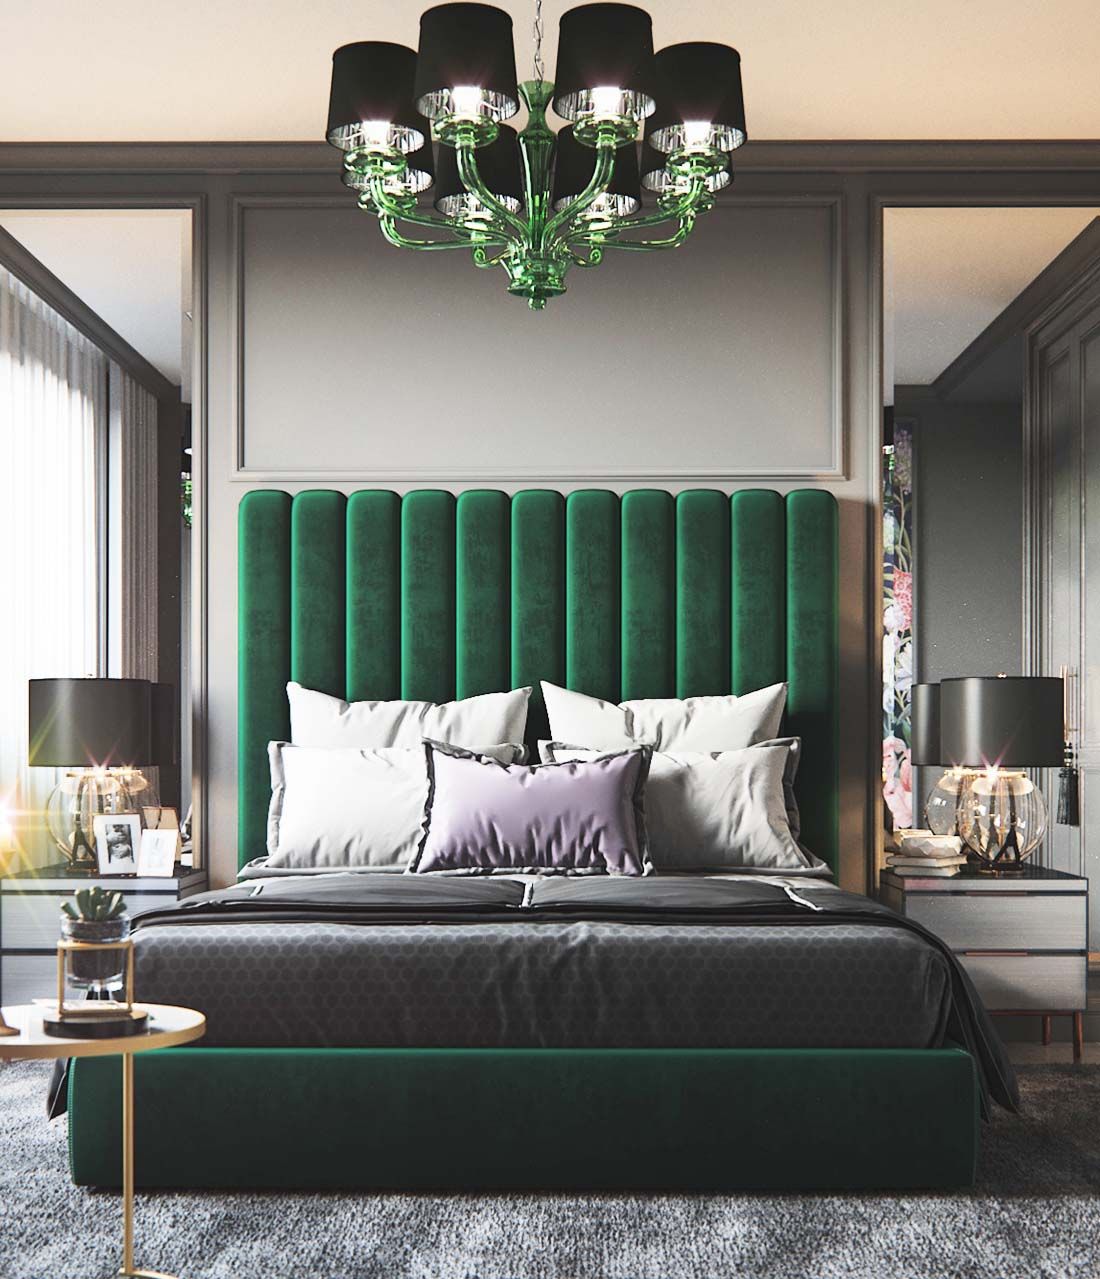 Gorgeous Teal and Green Luxury Bedroom in Art Deco Interior